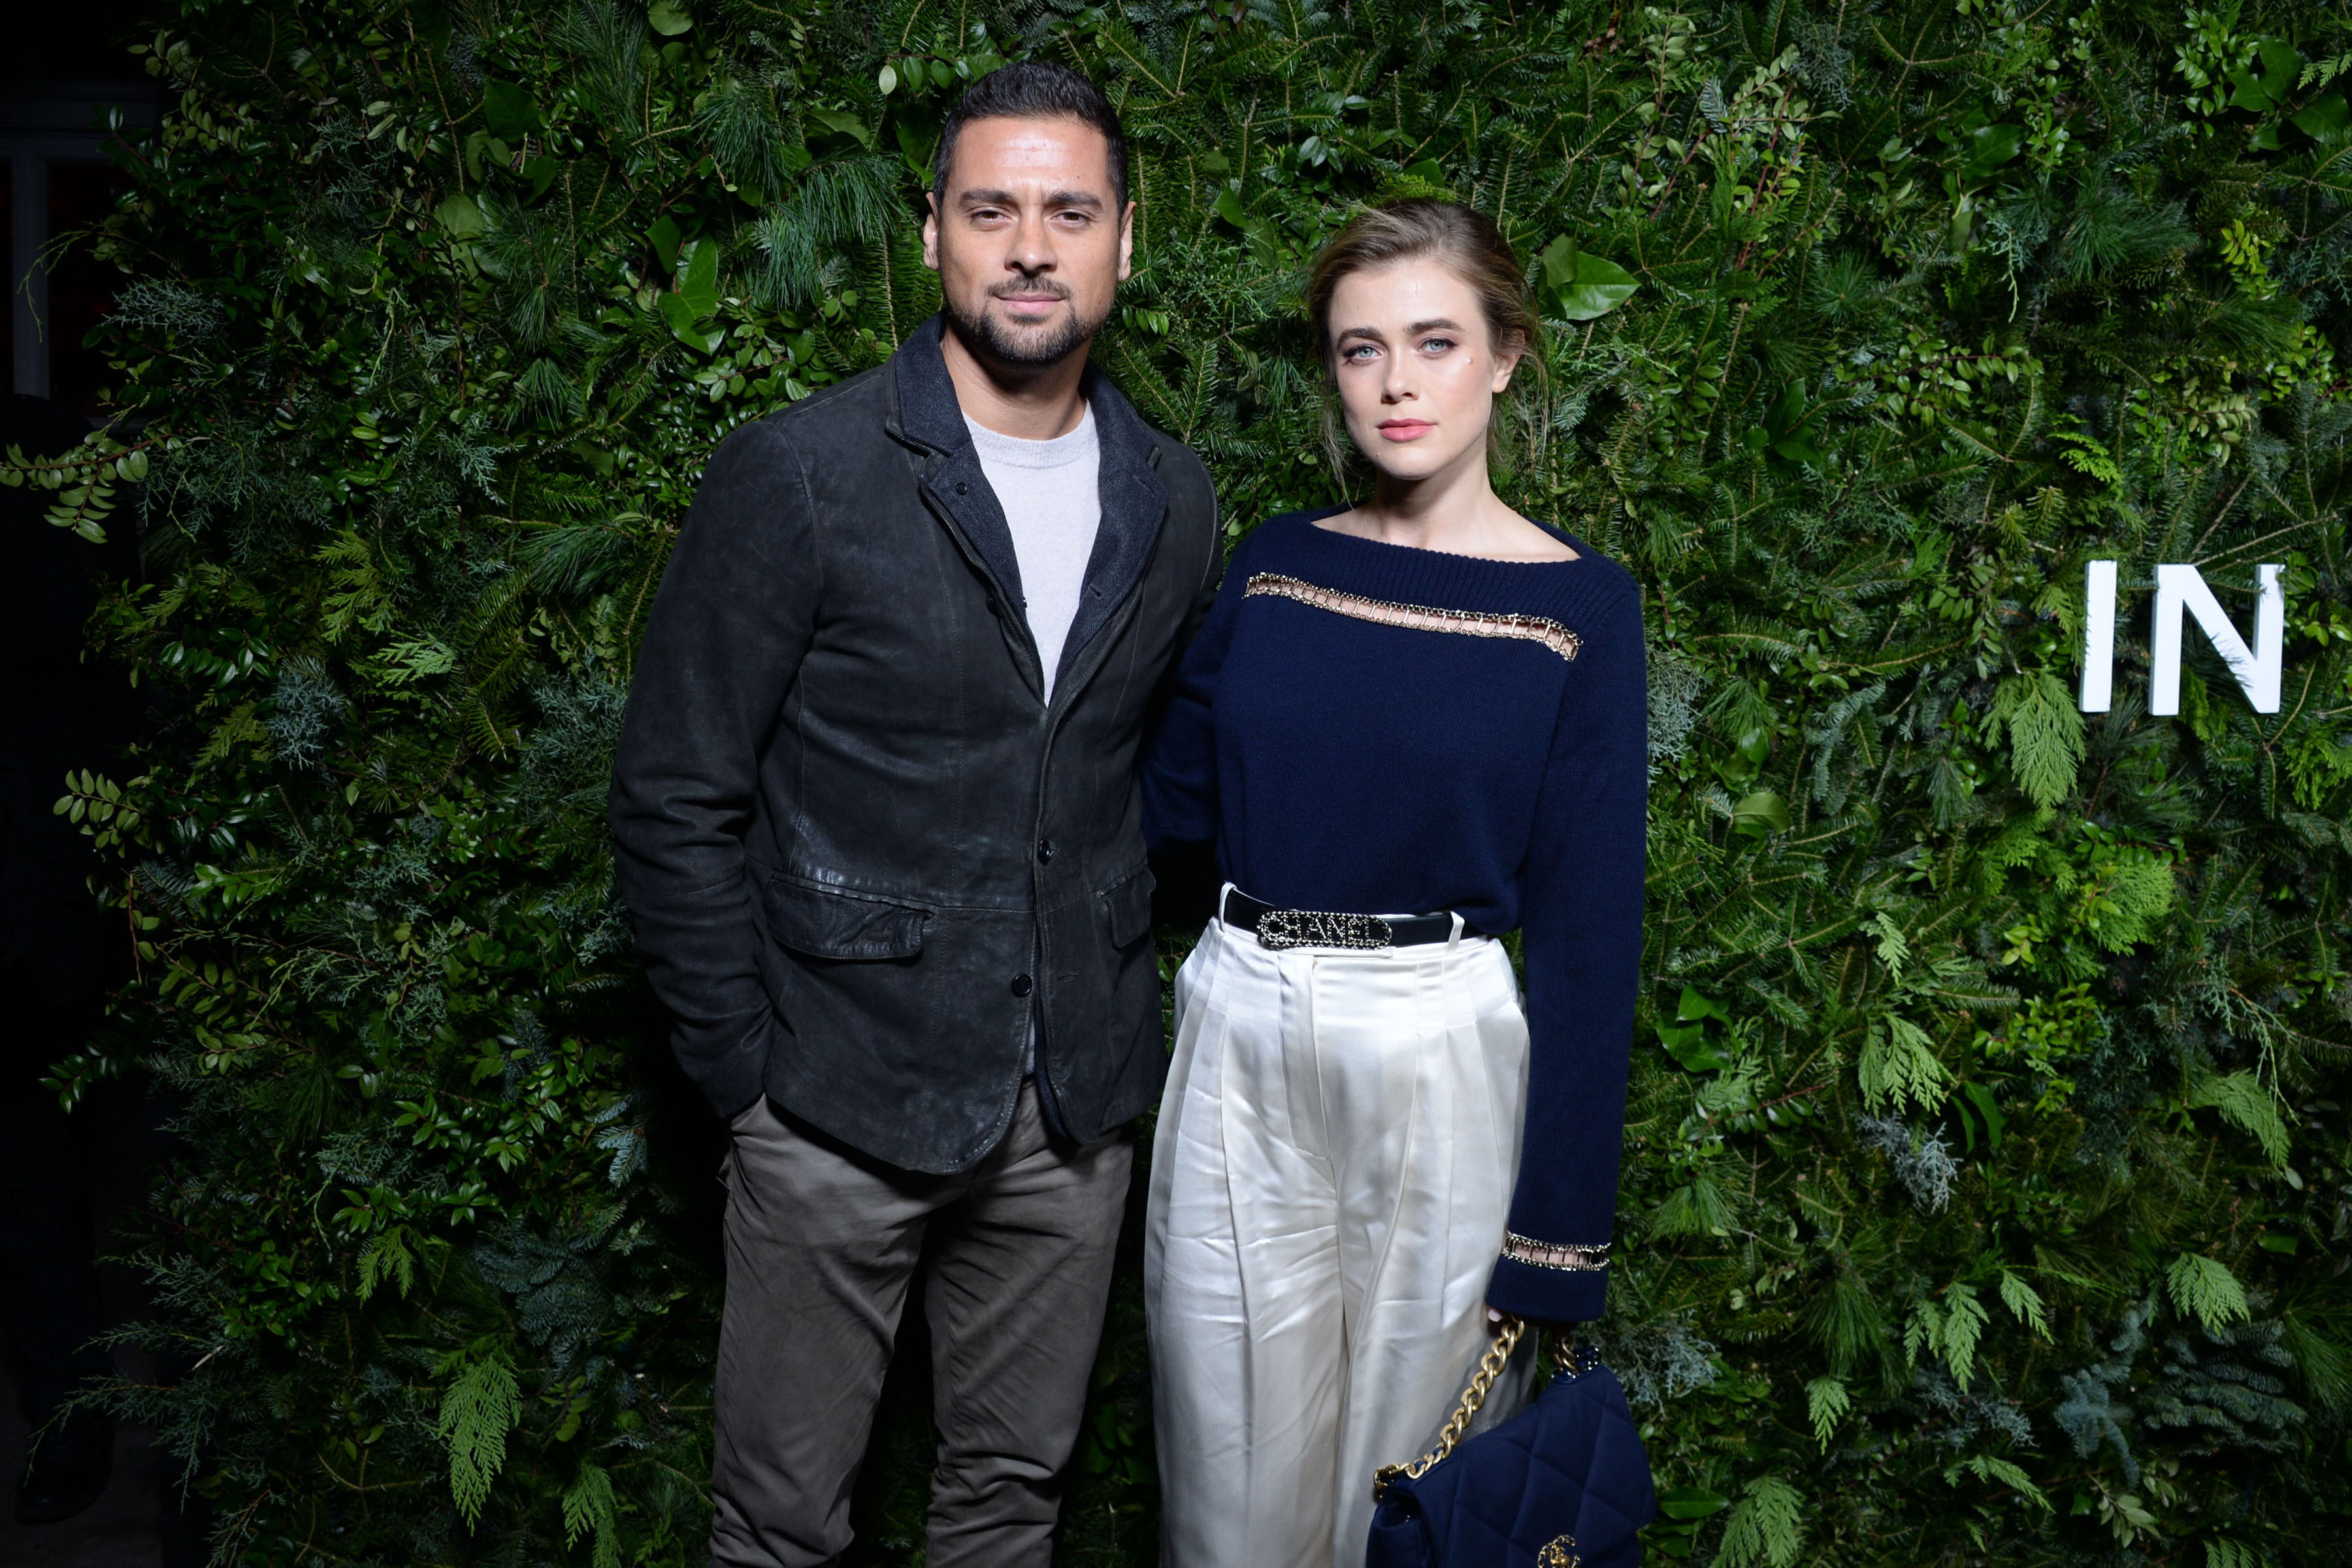 J.R. Ramirez and Melissa Roxburgh attend the Chanel Party on December 10, 2019, at The Standard, High Line, in New York City. | Source: Getty Images